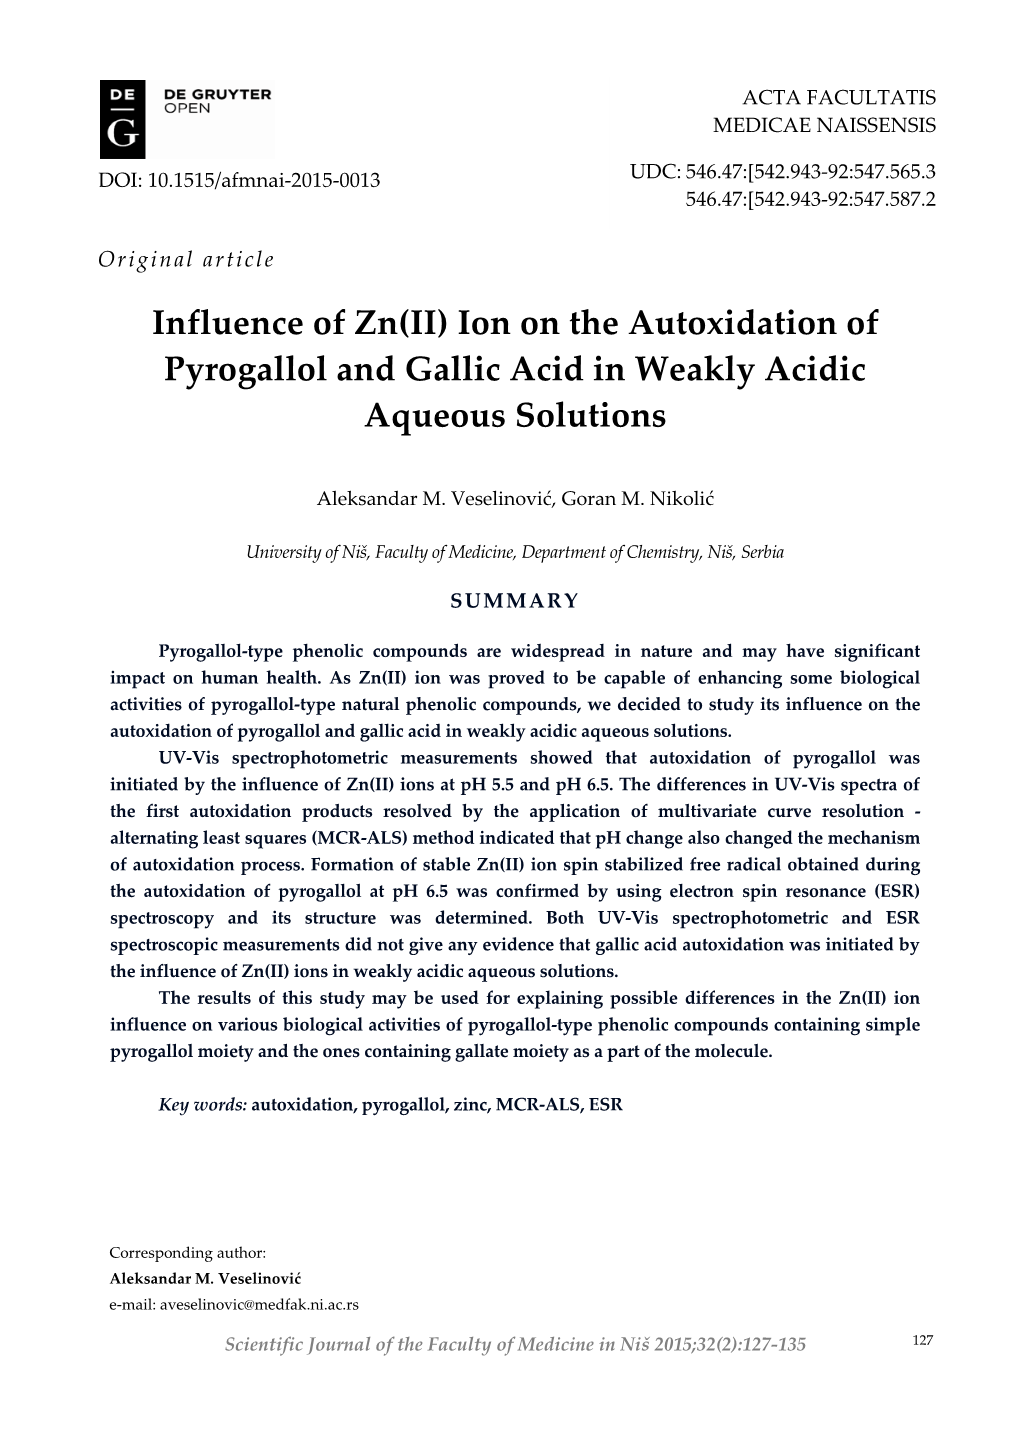 Influence of Zn(II) Ion on the Autoxidation of Pyrogallol And